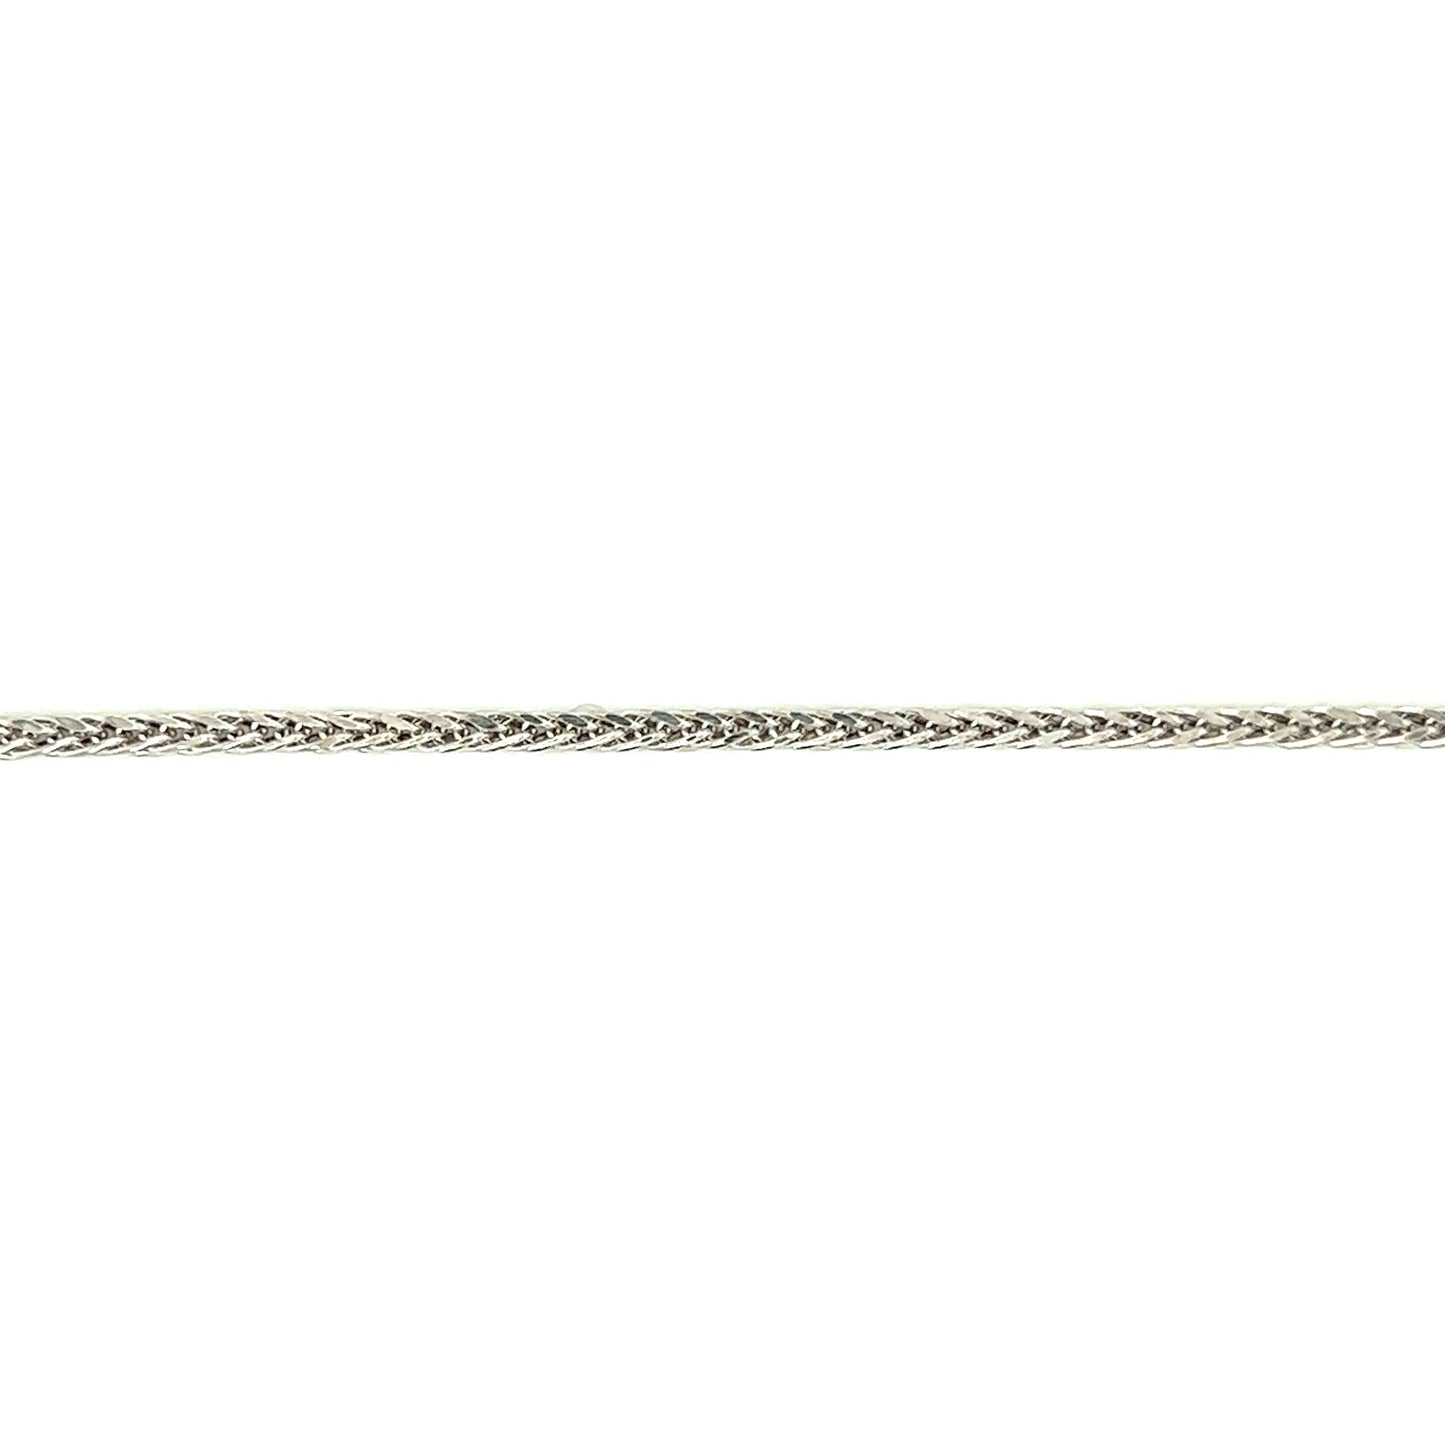 Square Wheat Chain 2.20mm with 20in Length in 14K White Gold Chain View